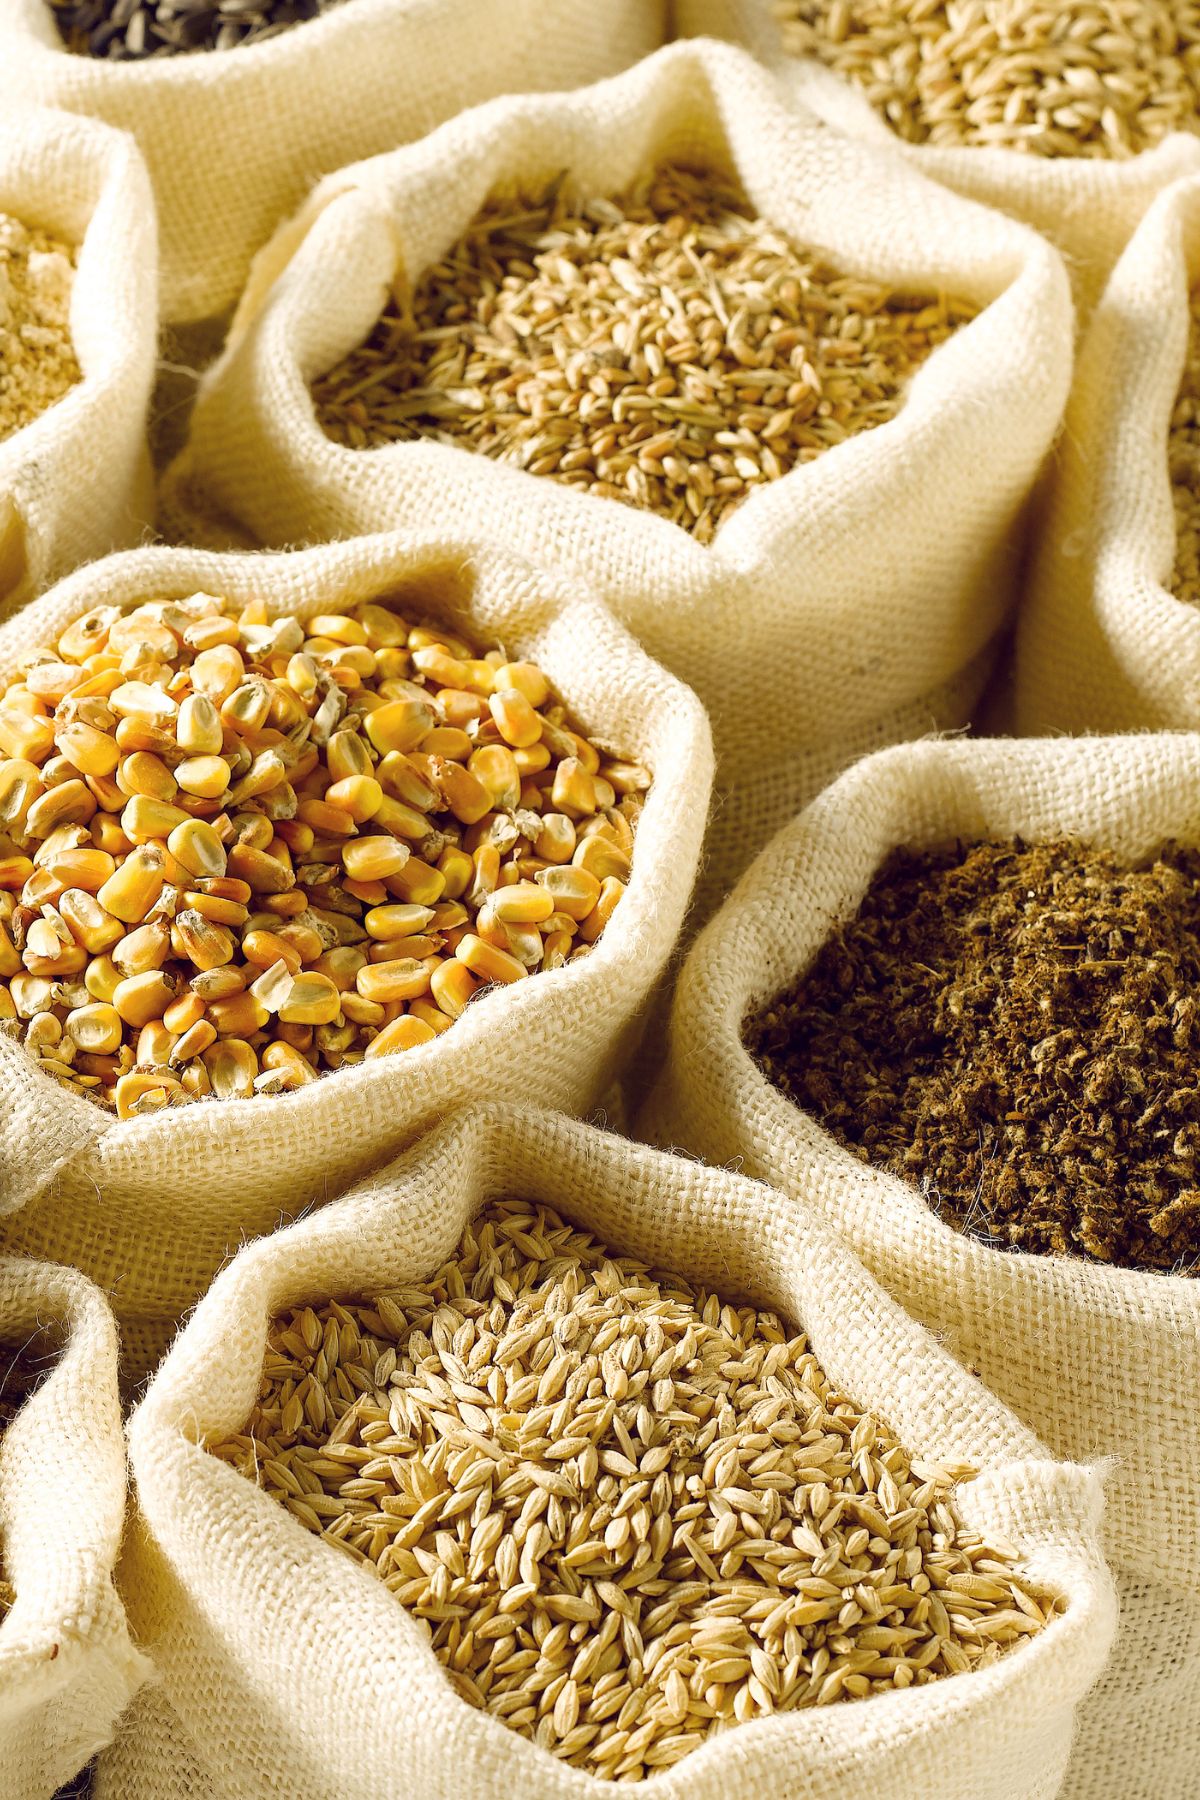 individual bags of different types of grains.